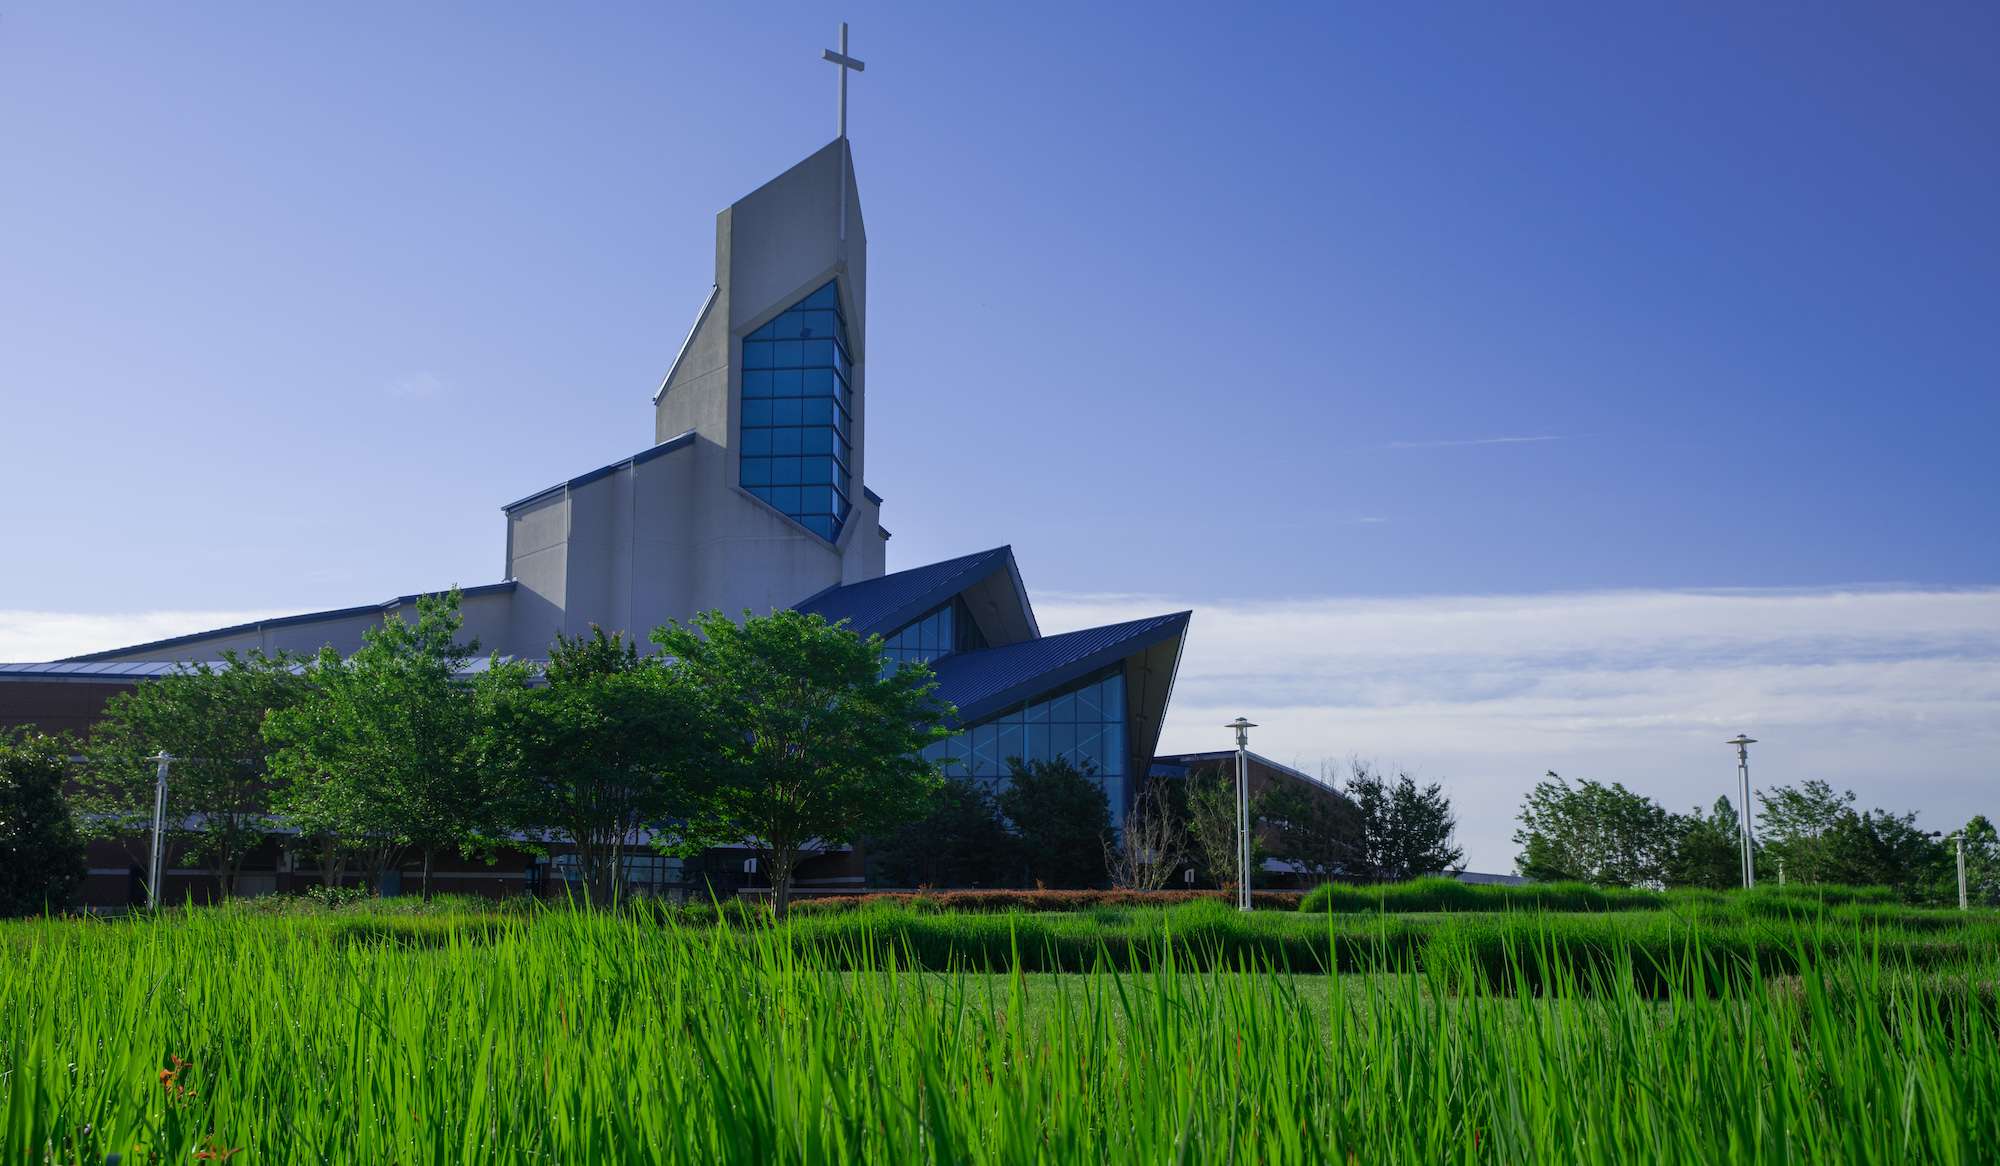 6 Considerations When Landscaping a Church